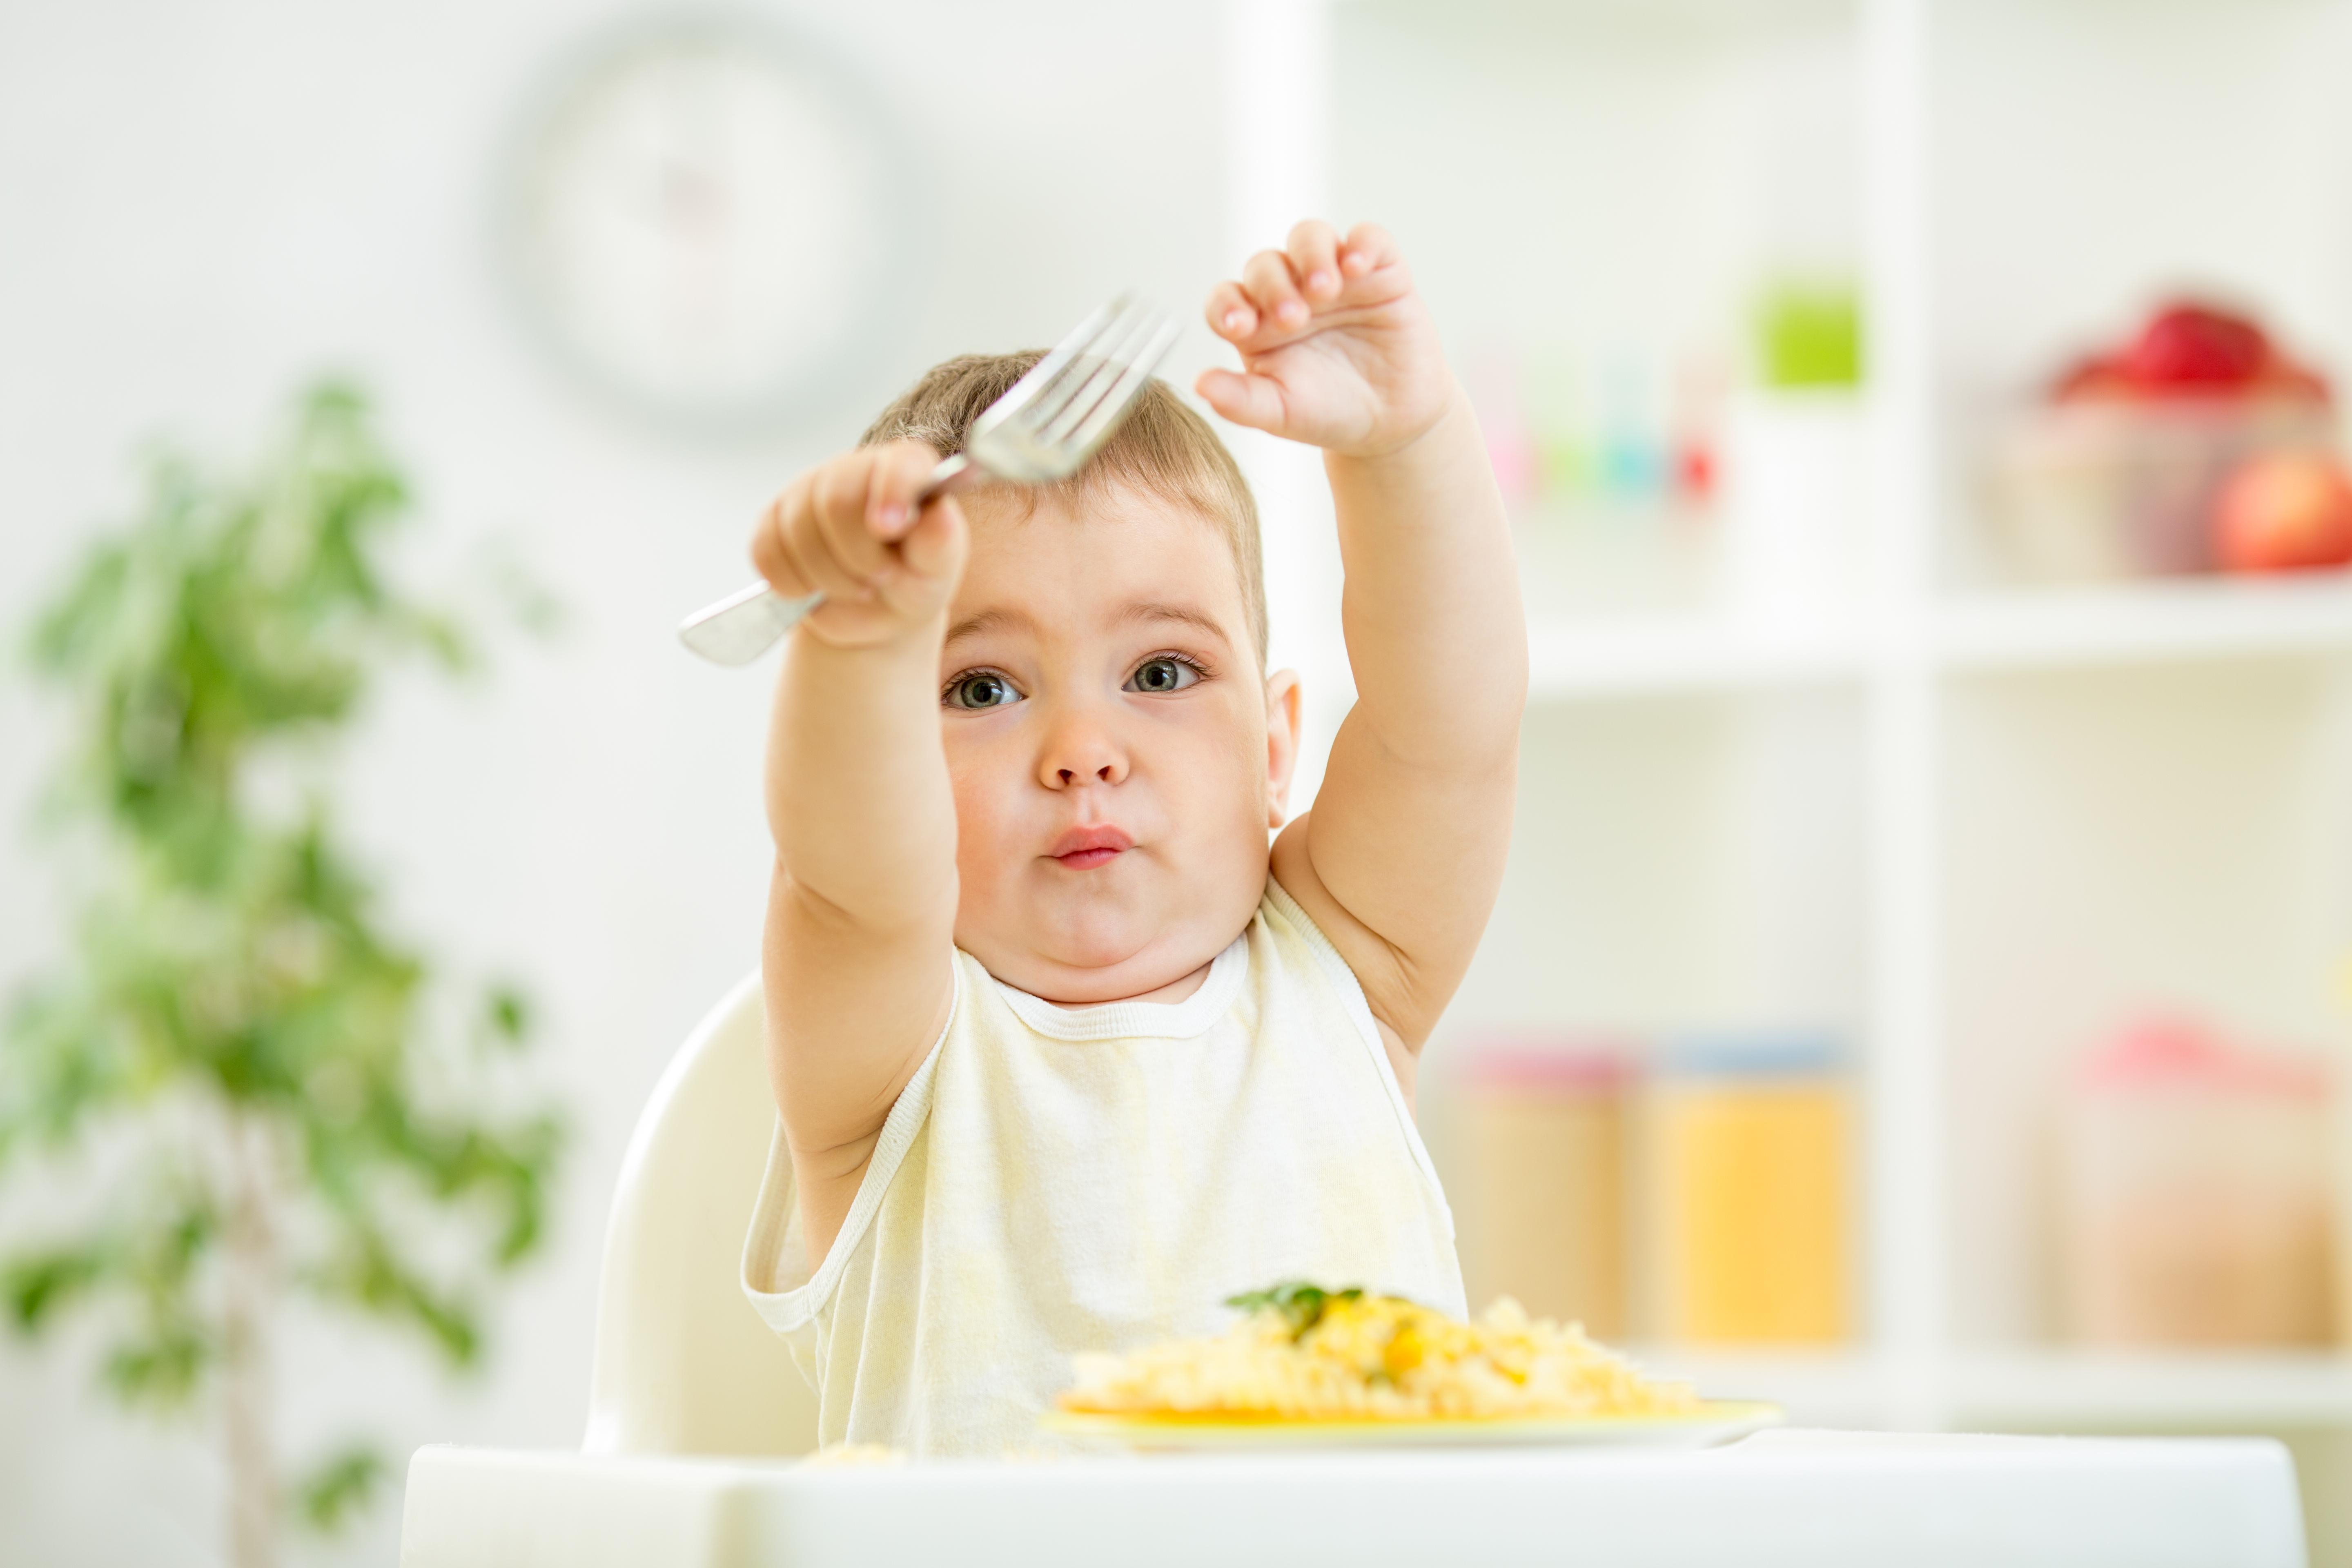 What's normal eating behavior for 12-18 month olds?